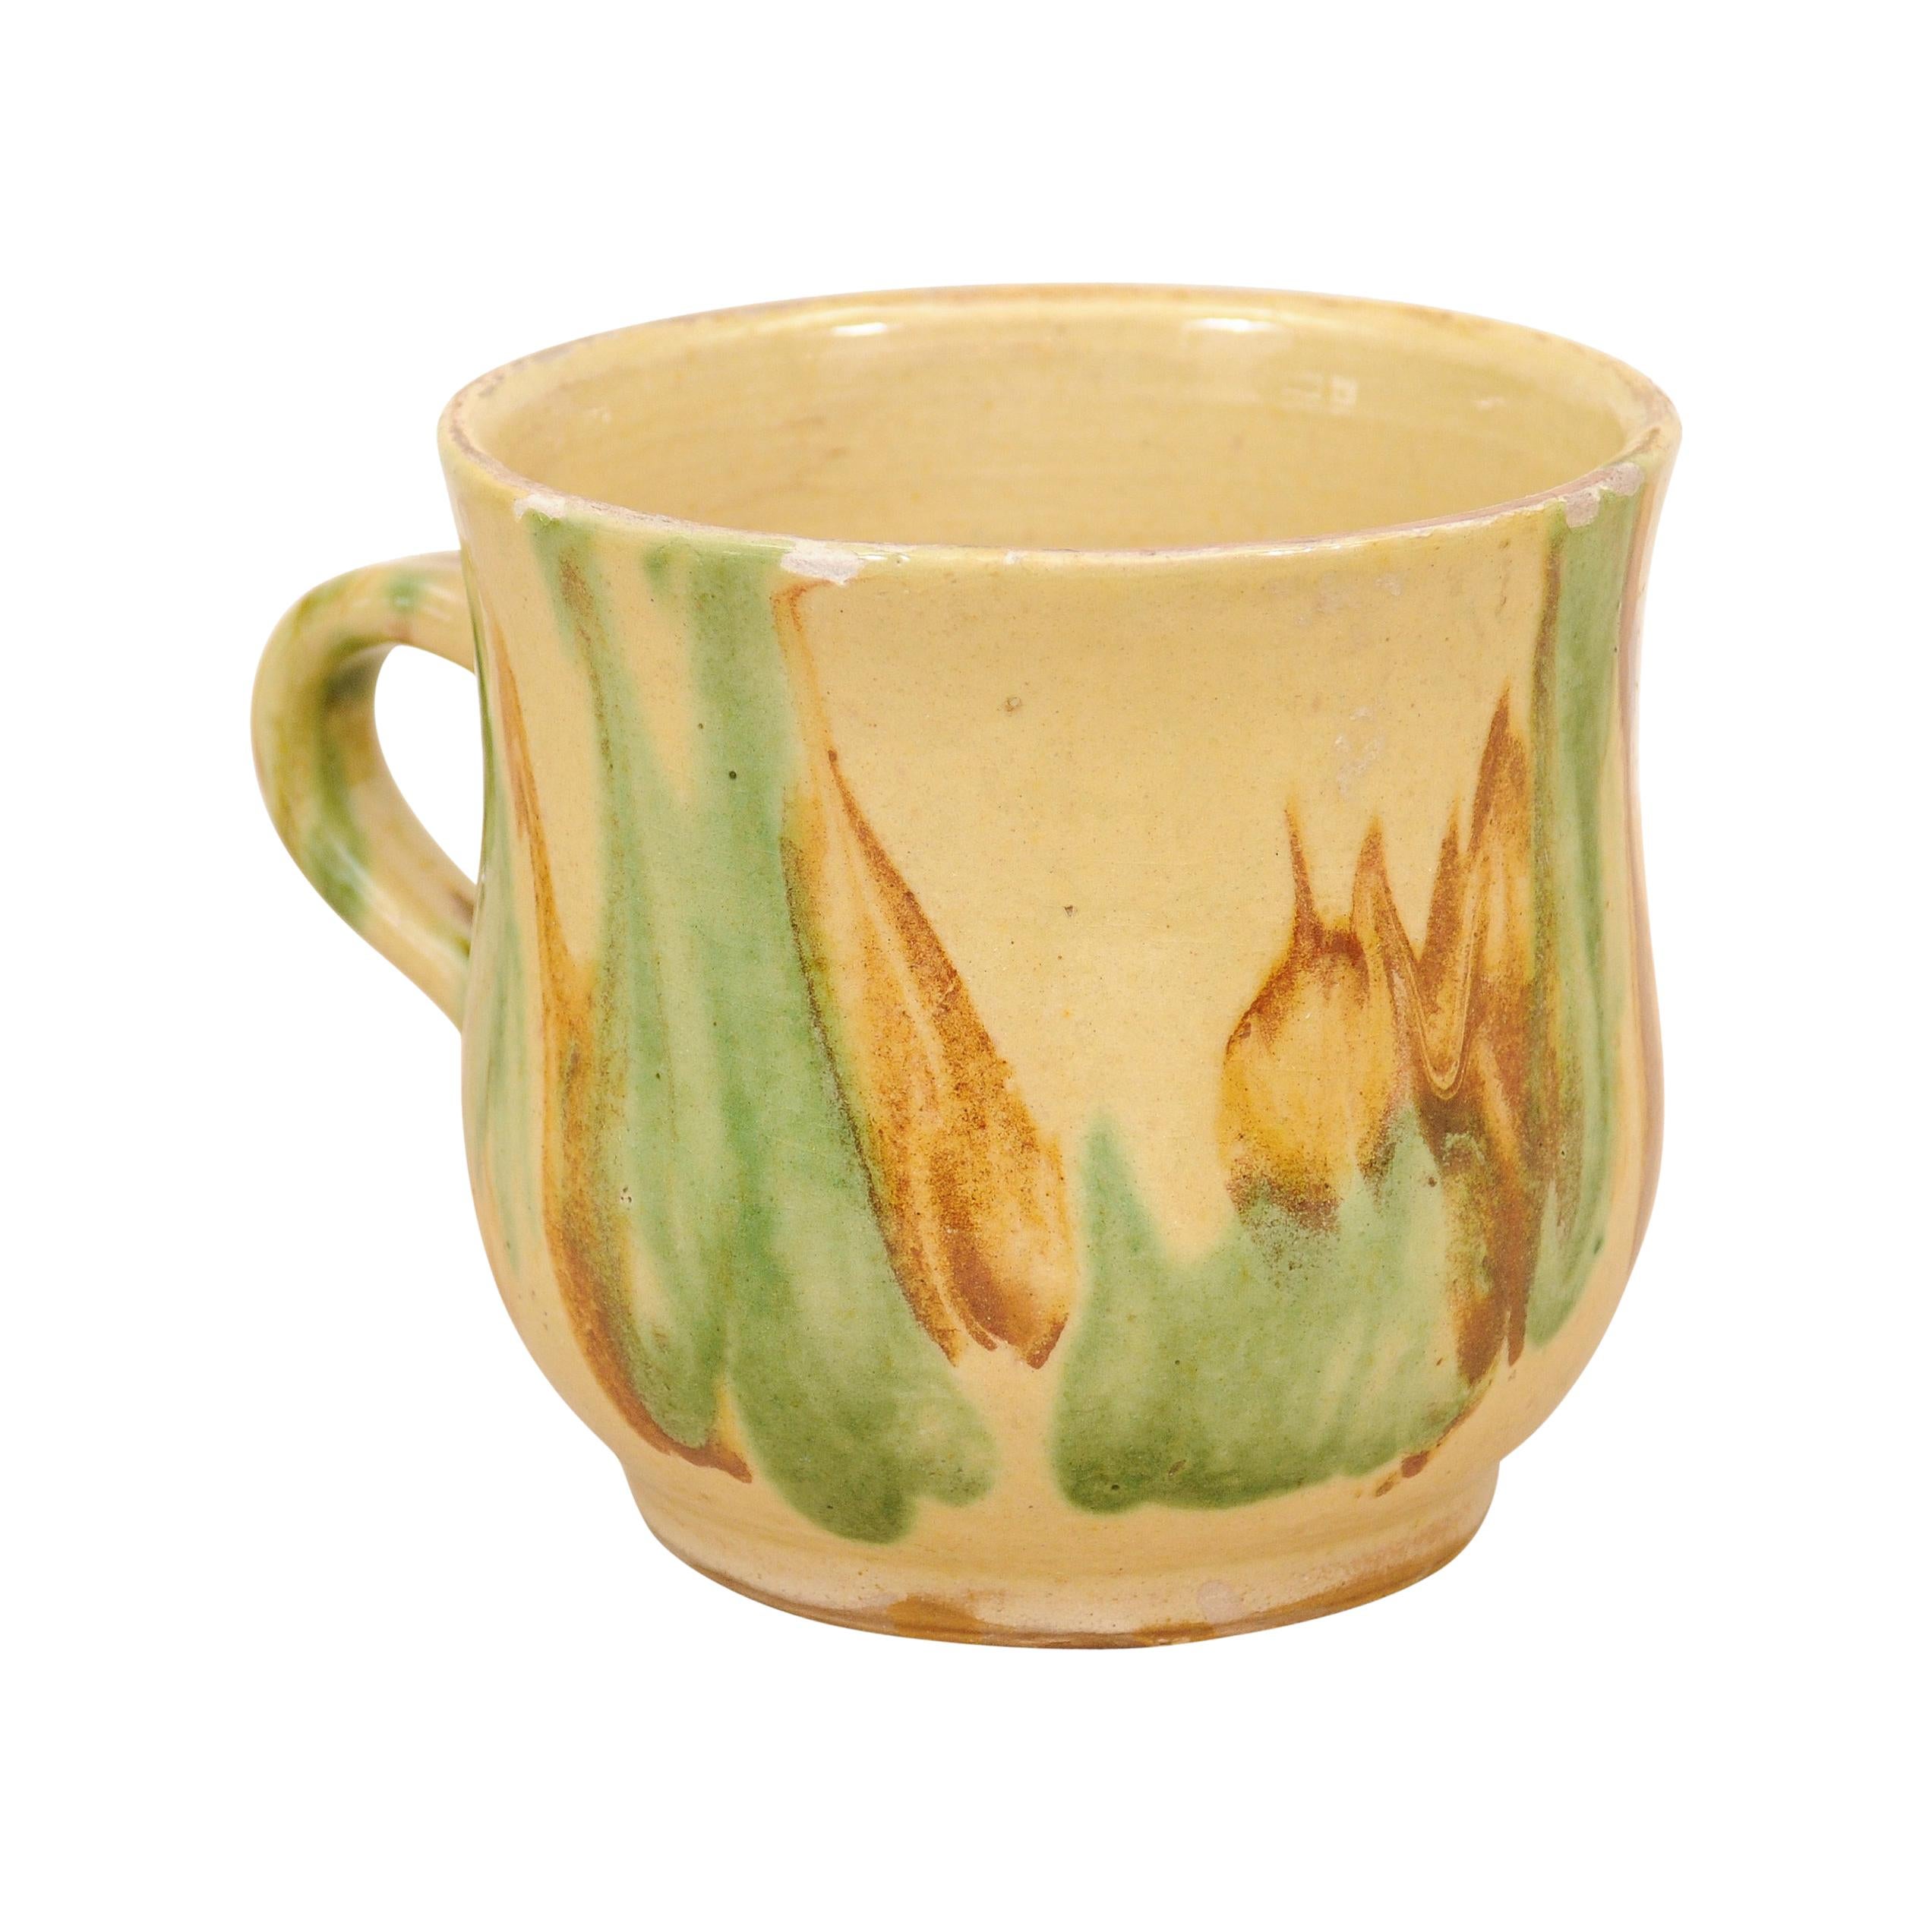 Rustic French 19th Century Pottery Mug with Yellow, Green and Rust Glaze